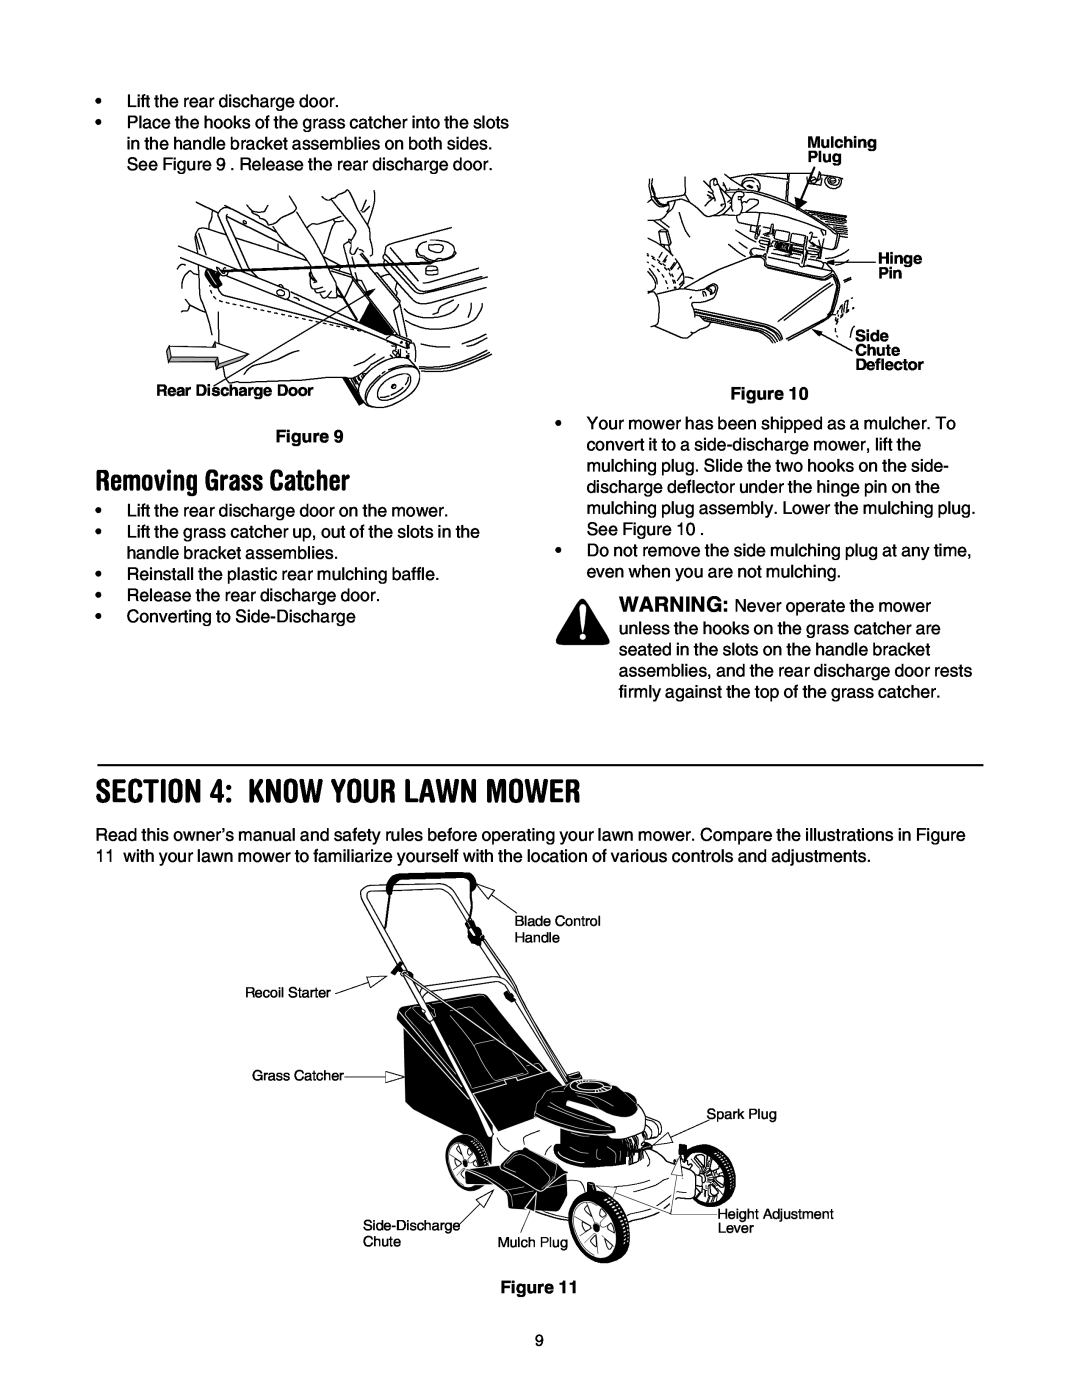 MTD 435 manual Know Your Lawn Mower, Removing Grass Catcher 